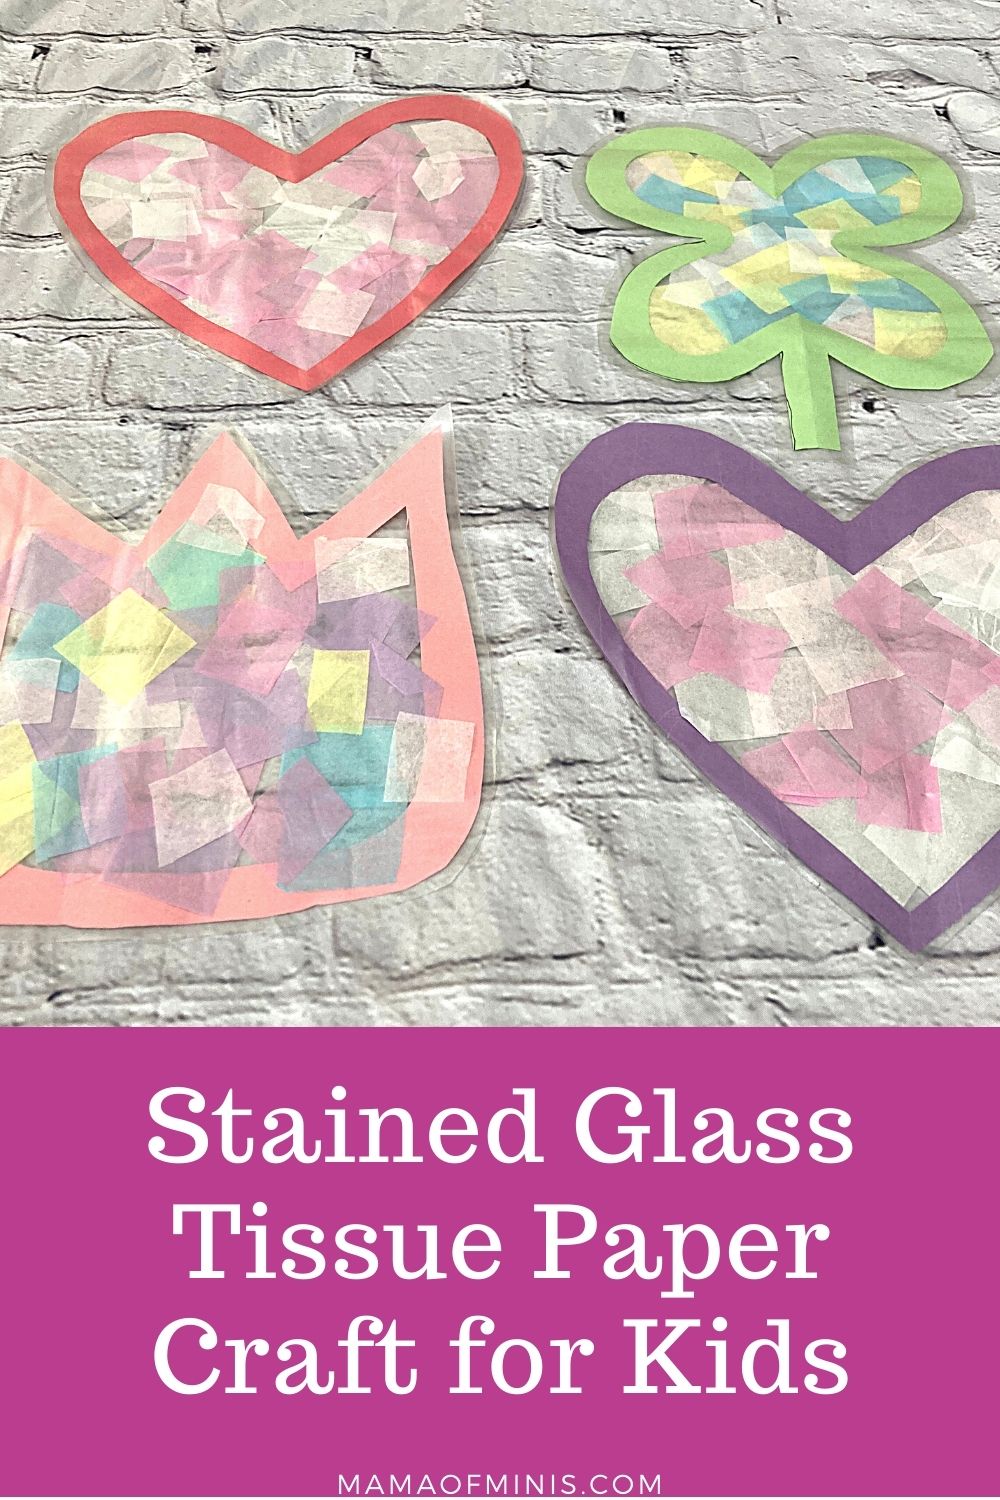 Stained Glass Tissue Paper Craft for Kids